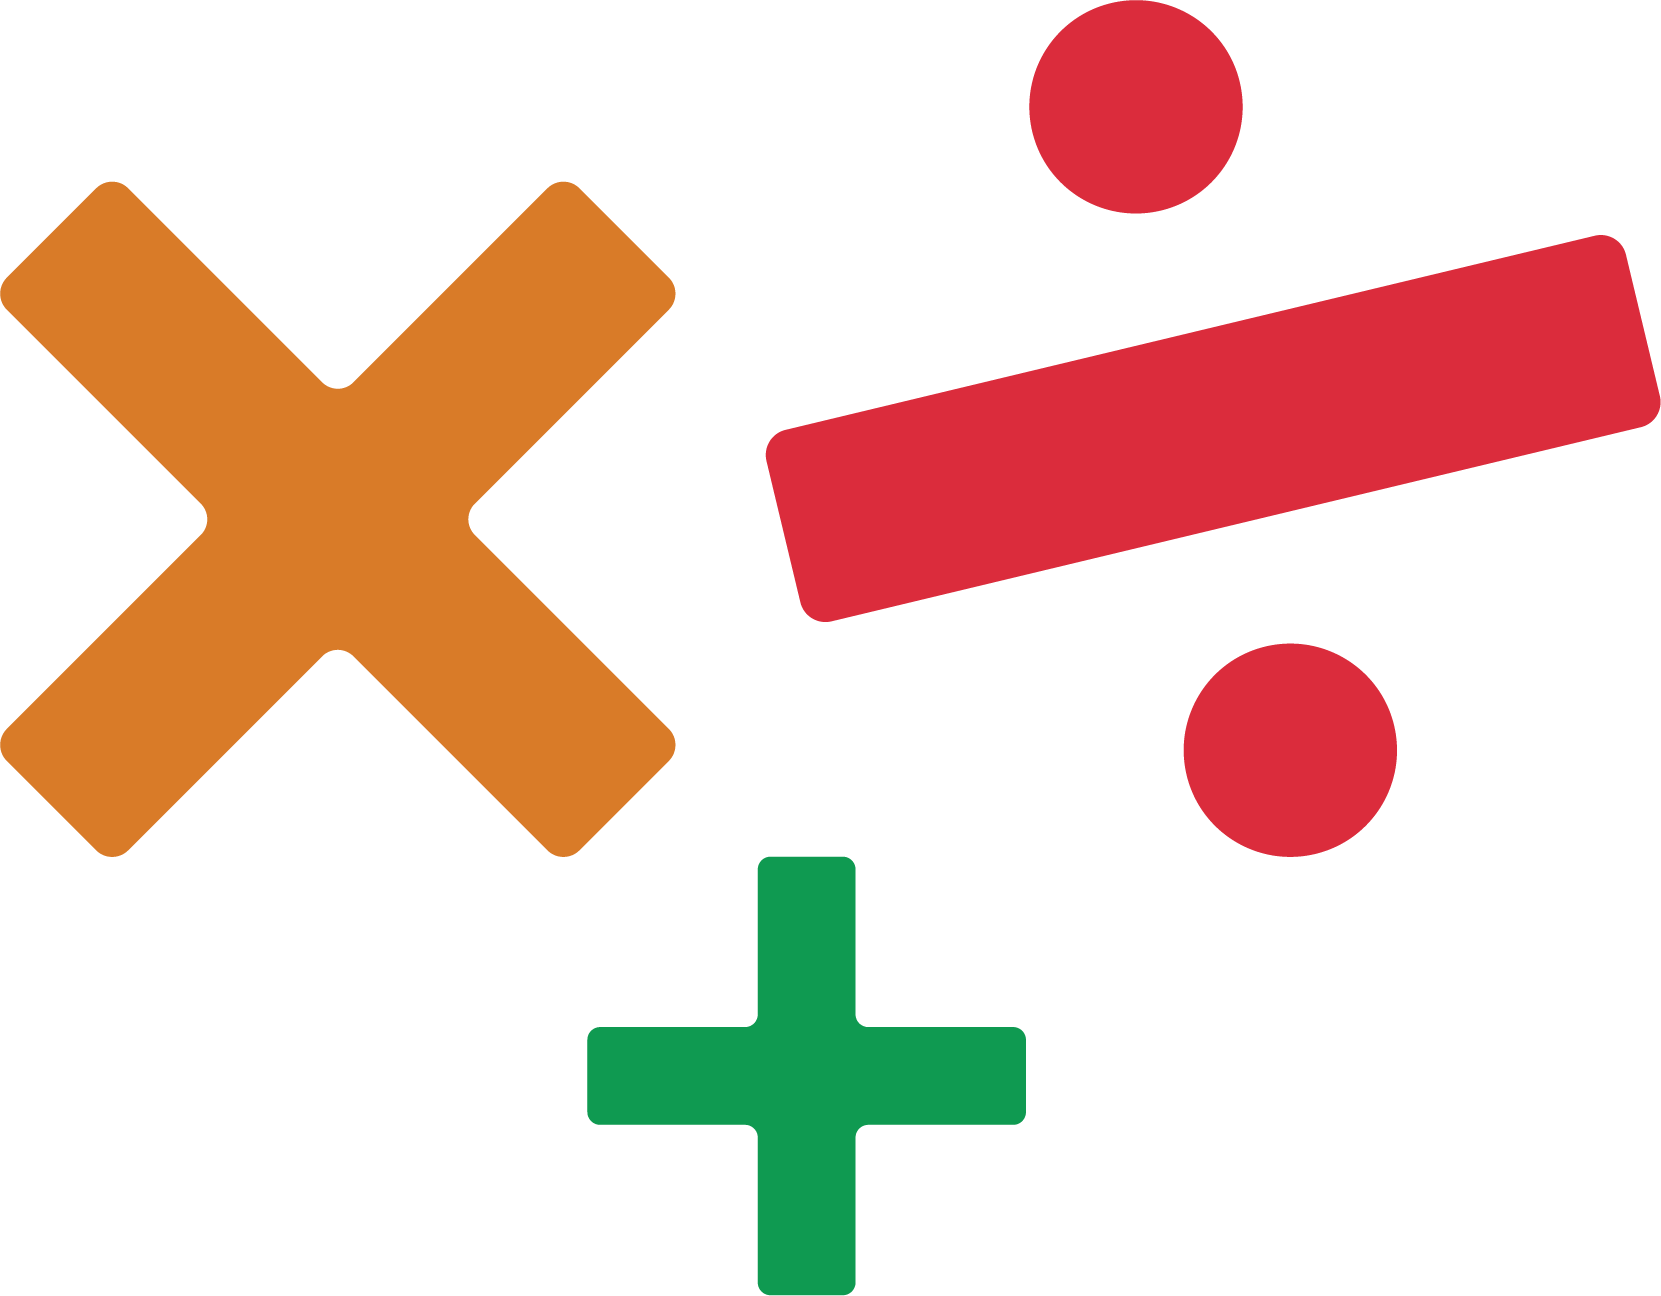 Animated math symbols. A green addition (+) sign, a red divide sign, and an orange multiplication (x) sign.